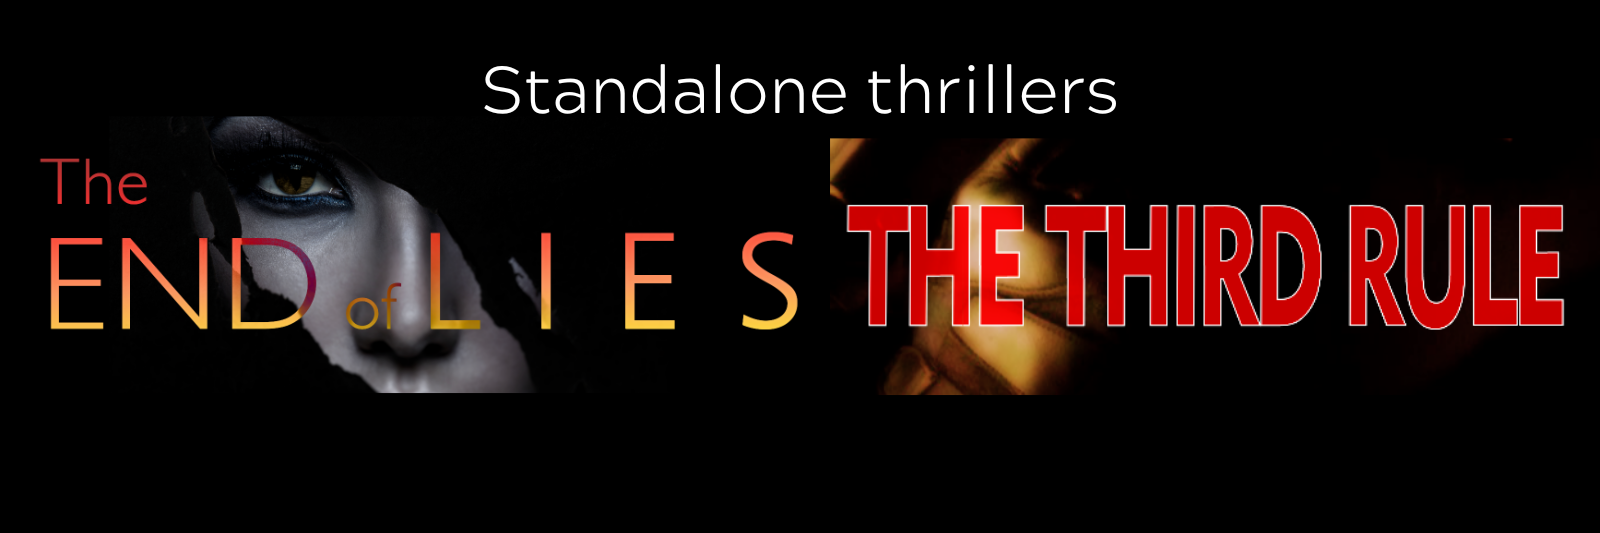 The End of Lies and The Third Rule banner